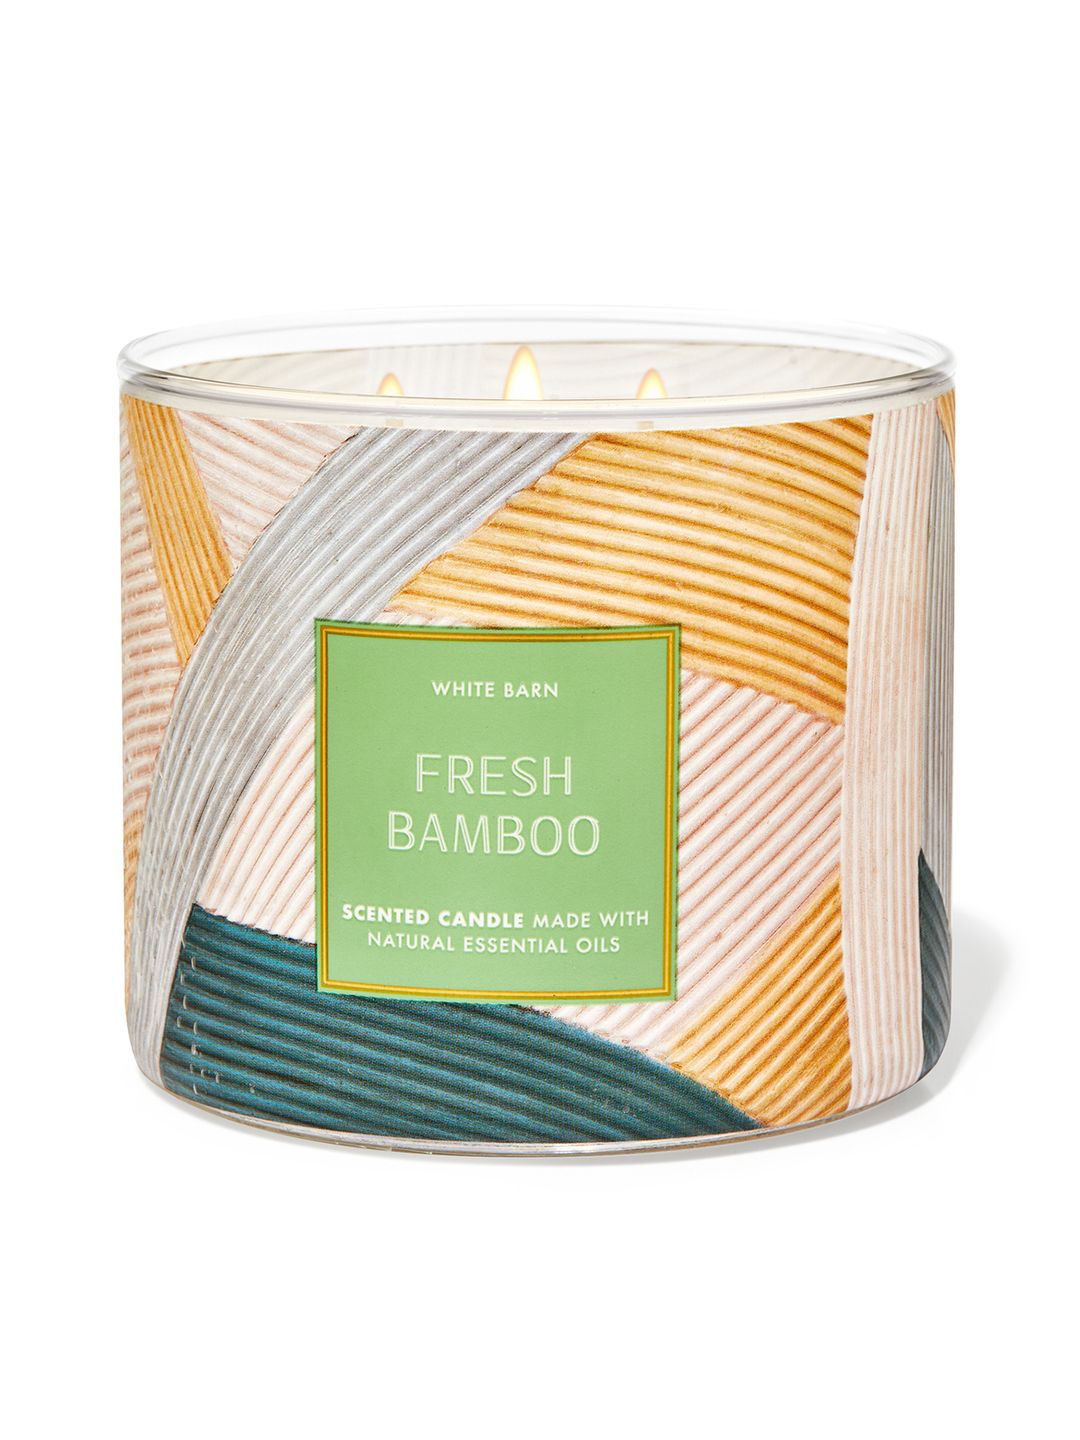 Bath & Body Works White Barn Fresh Bamboo 3-Wick Scented Candle - 411 g Price in India